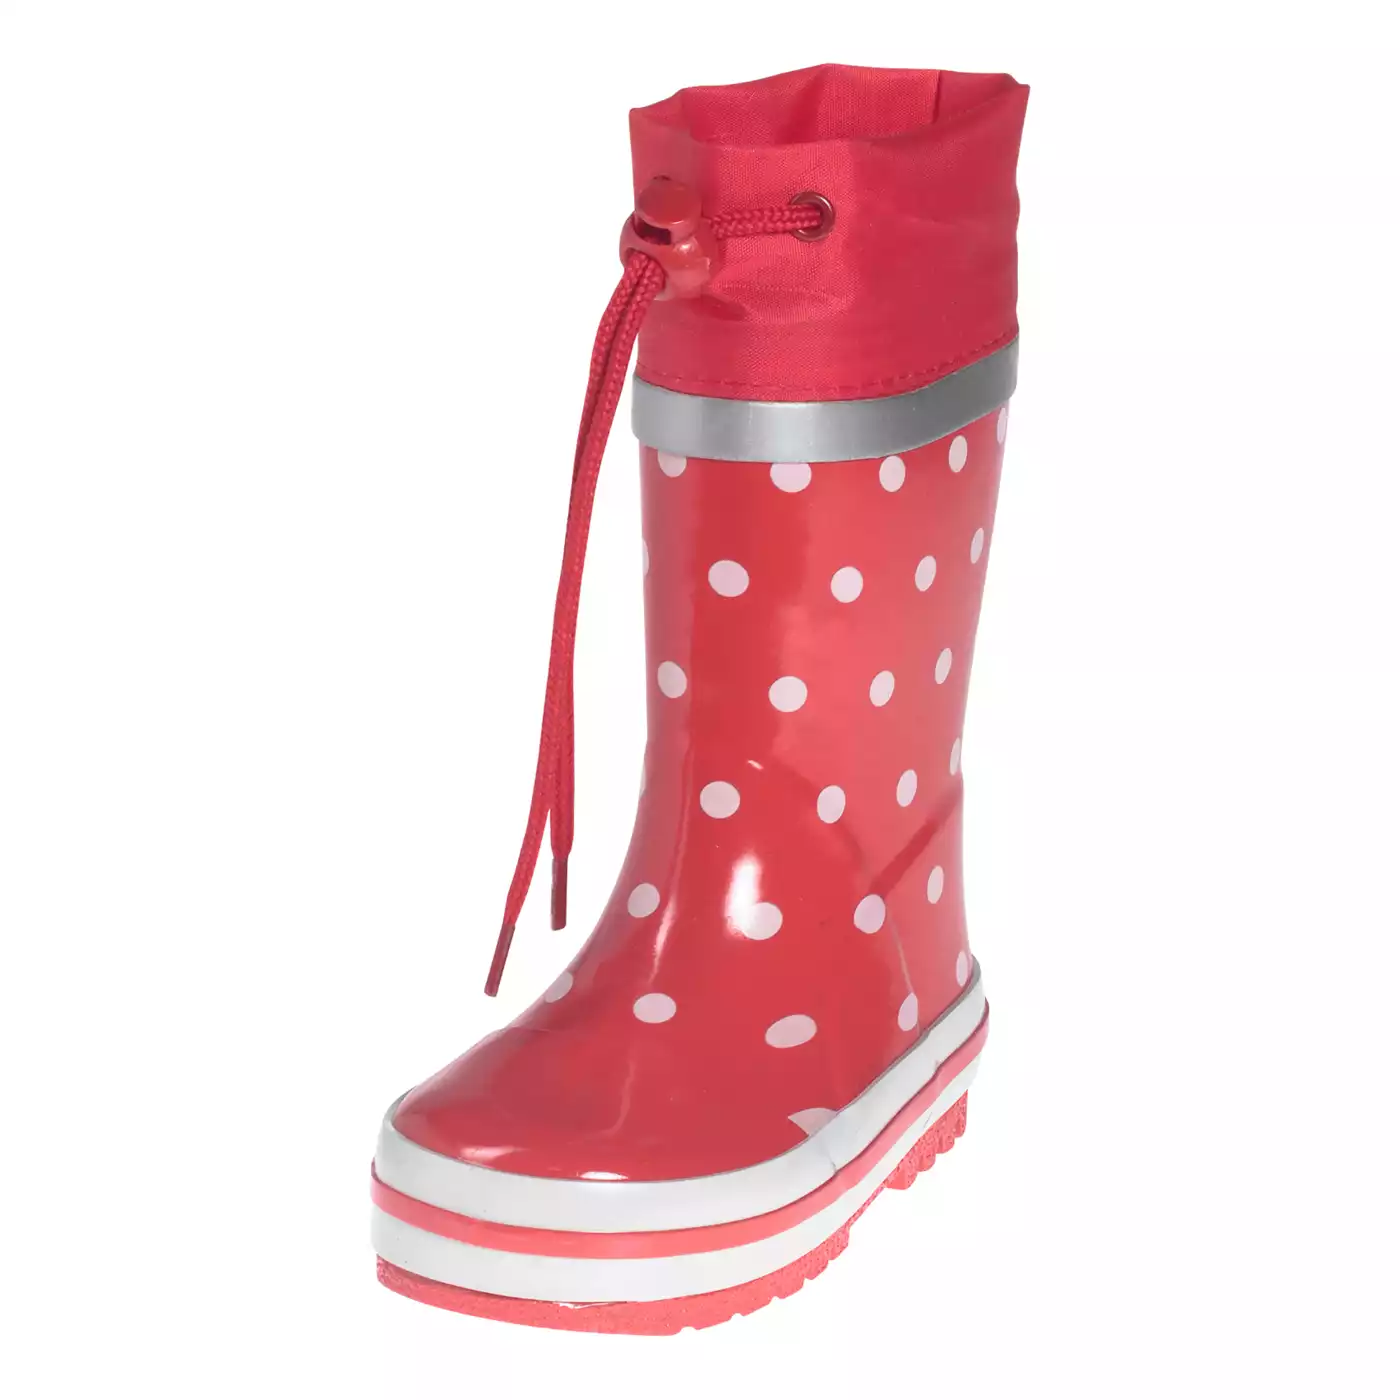 Gummistiefel Punkte Playshoes Rot M2027558518007 1